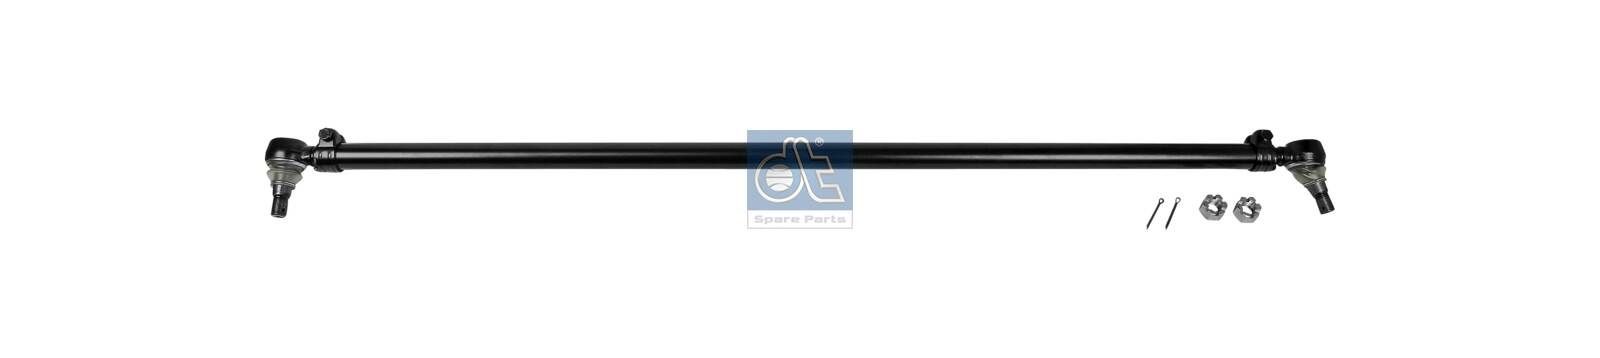 DT Spare Parts 2.53116 Rod Assembly 74 22 325 737